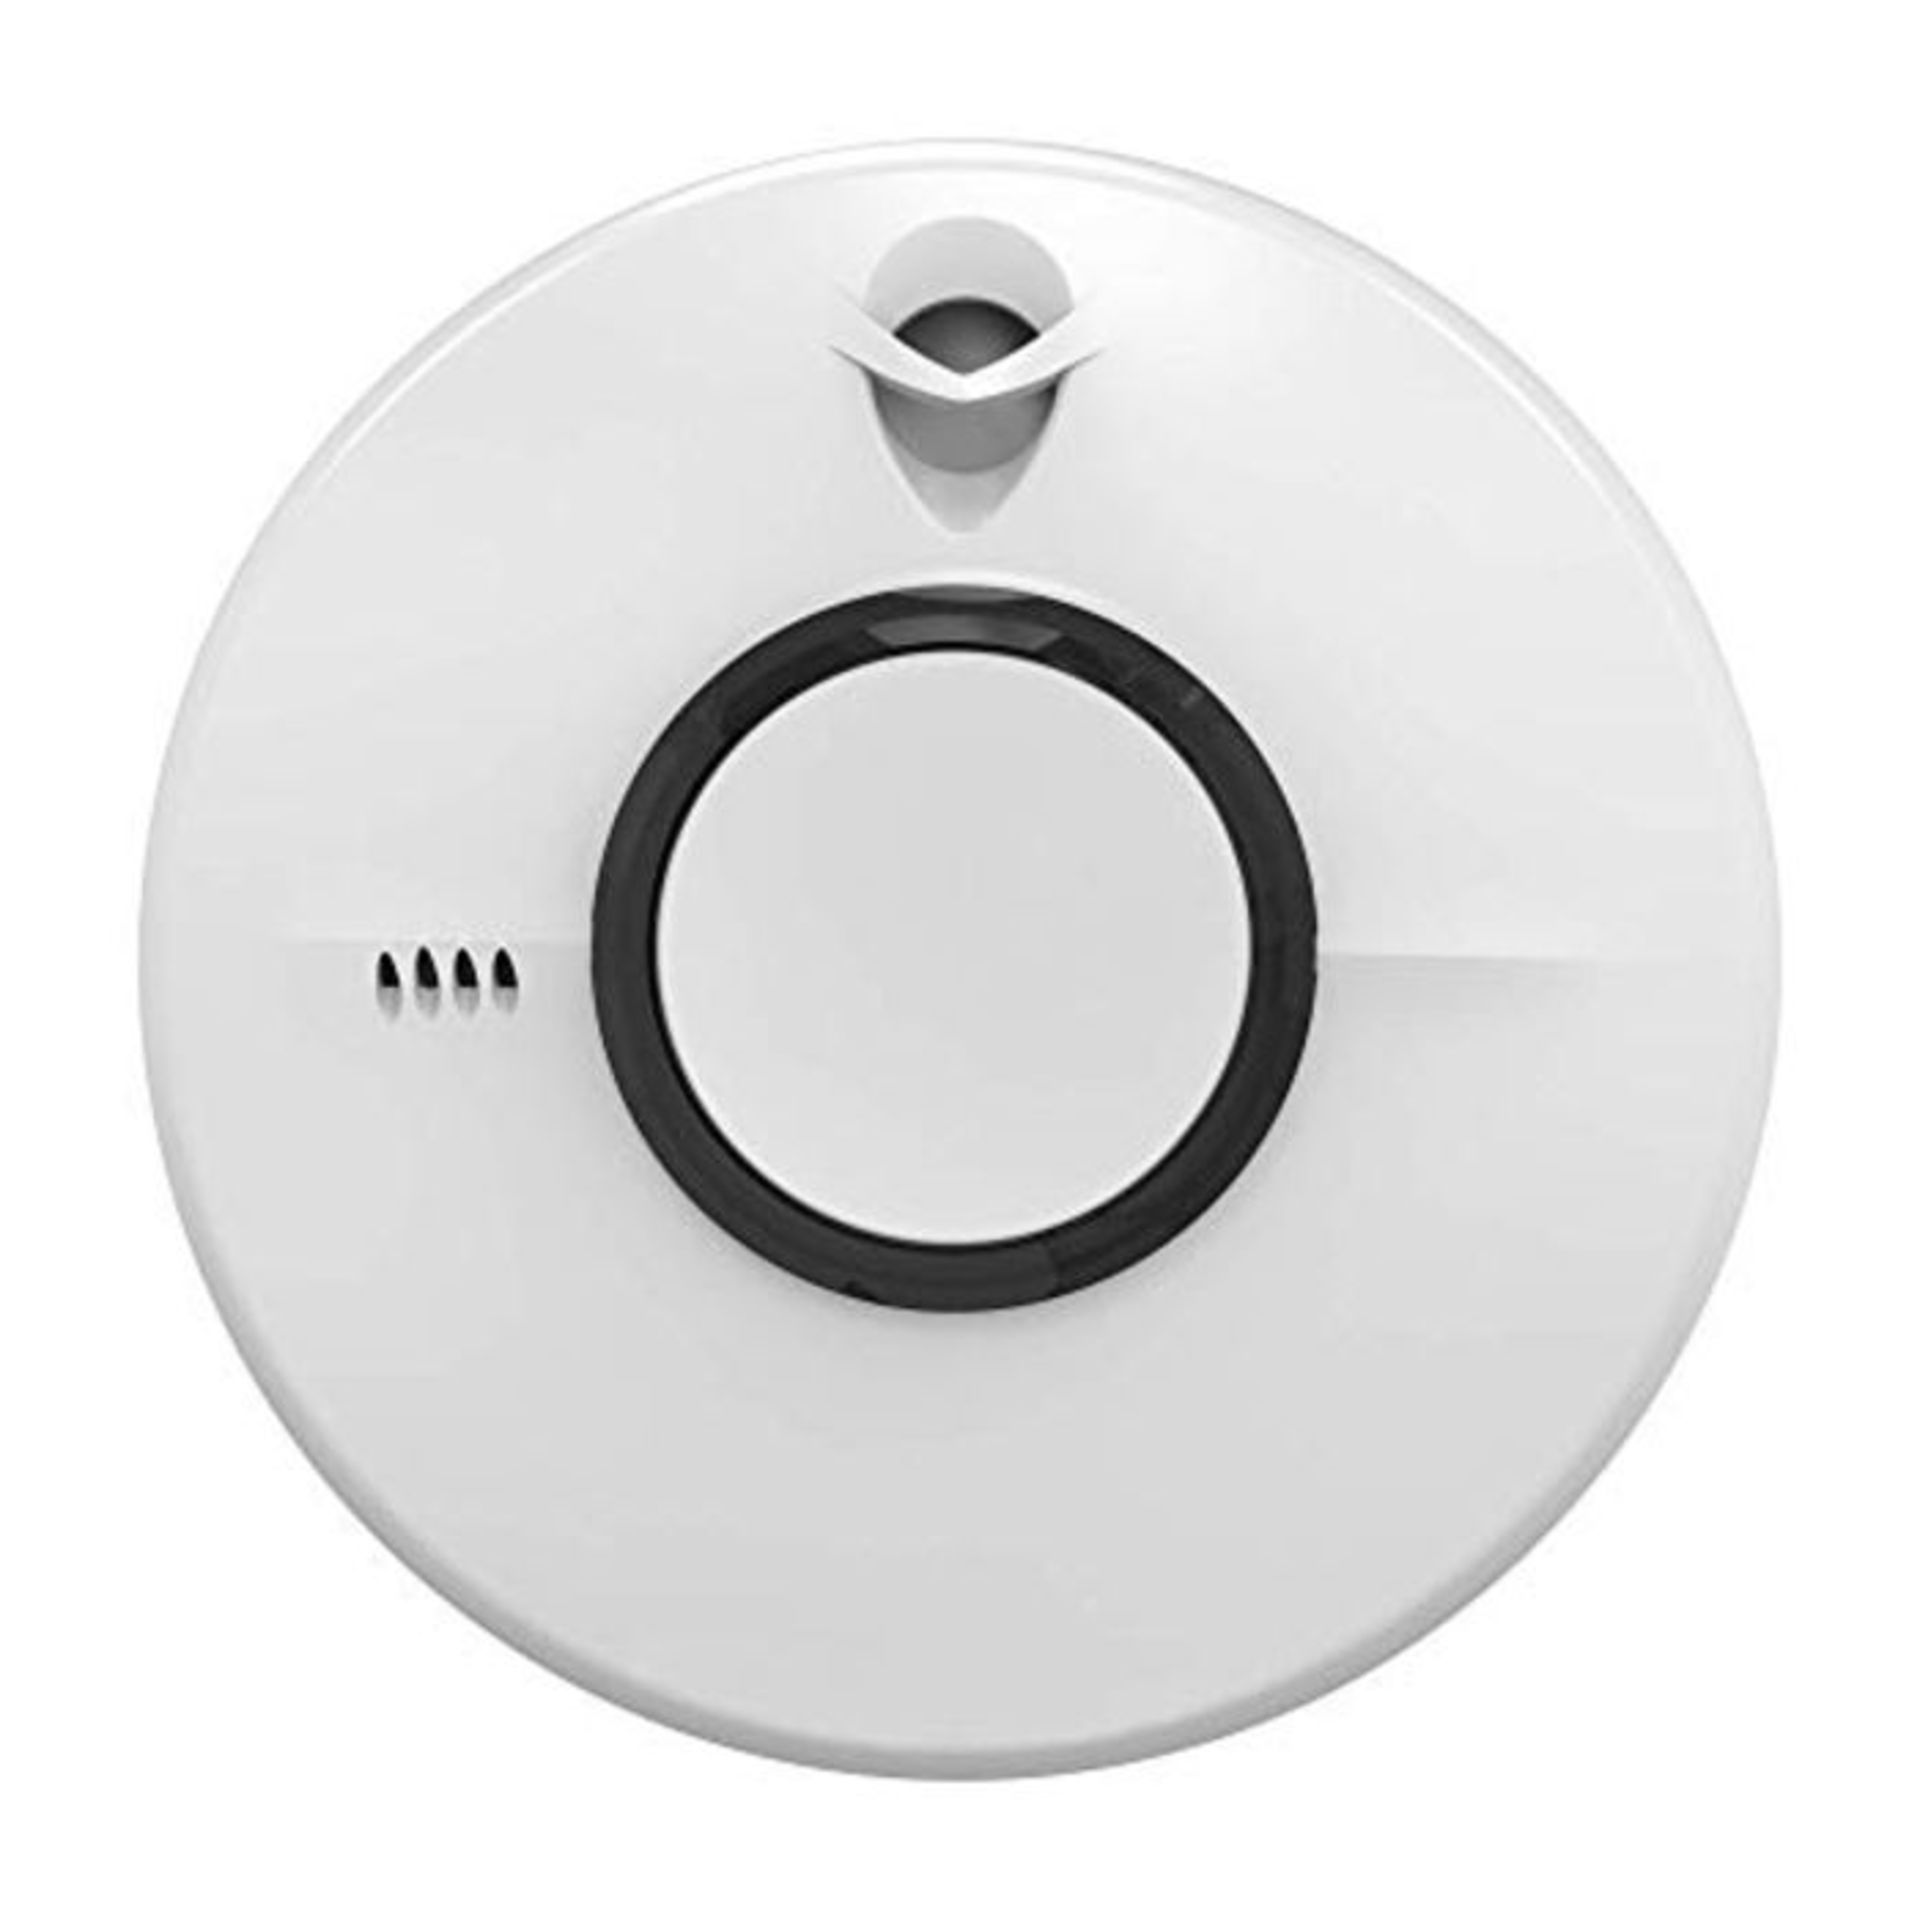 1x FireAngel battery powered smoke alarm with 10&nbsp;year battery for use in home liv